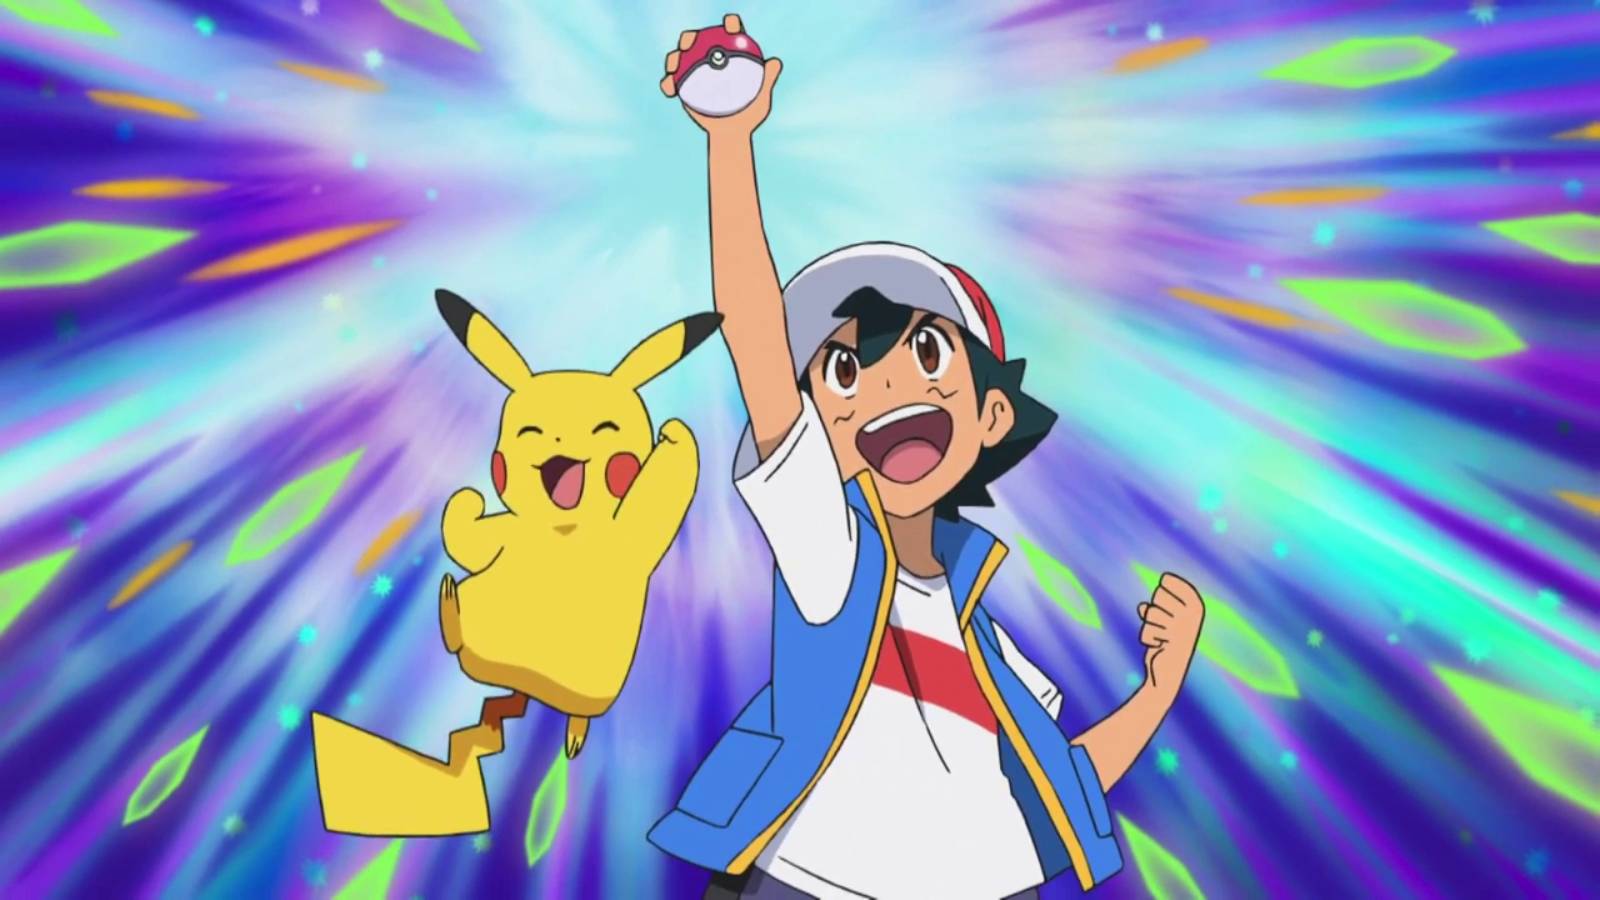 Ash Ketchum holds a Pokeball aloft, celebrating a catch, while his Pikachu joyously leaps into the air to his right